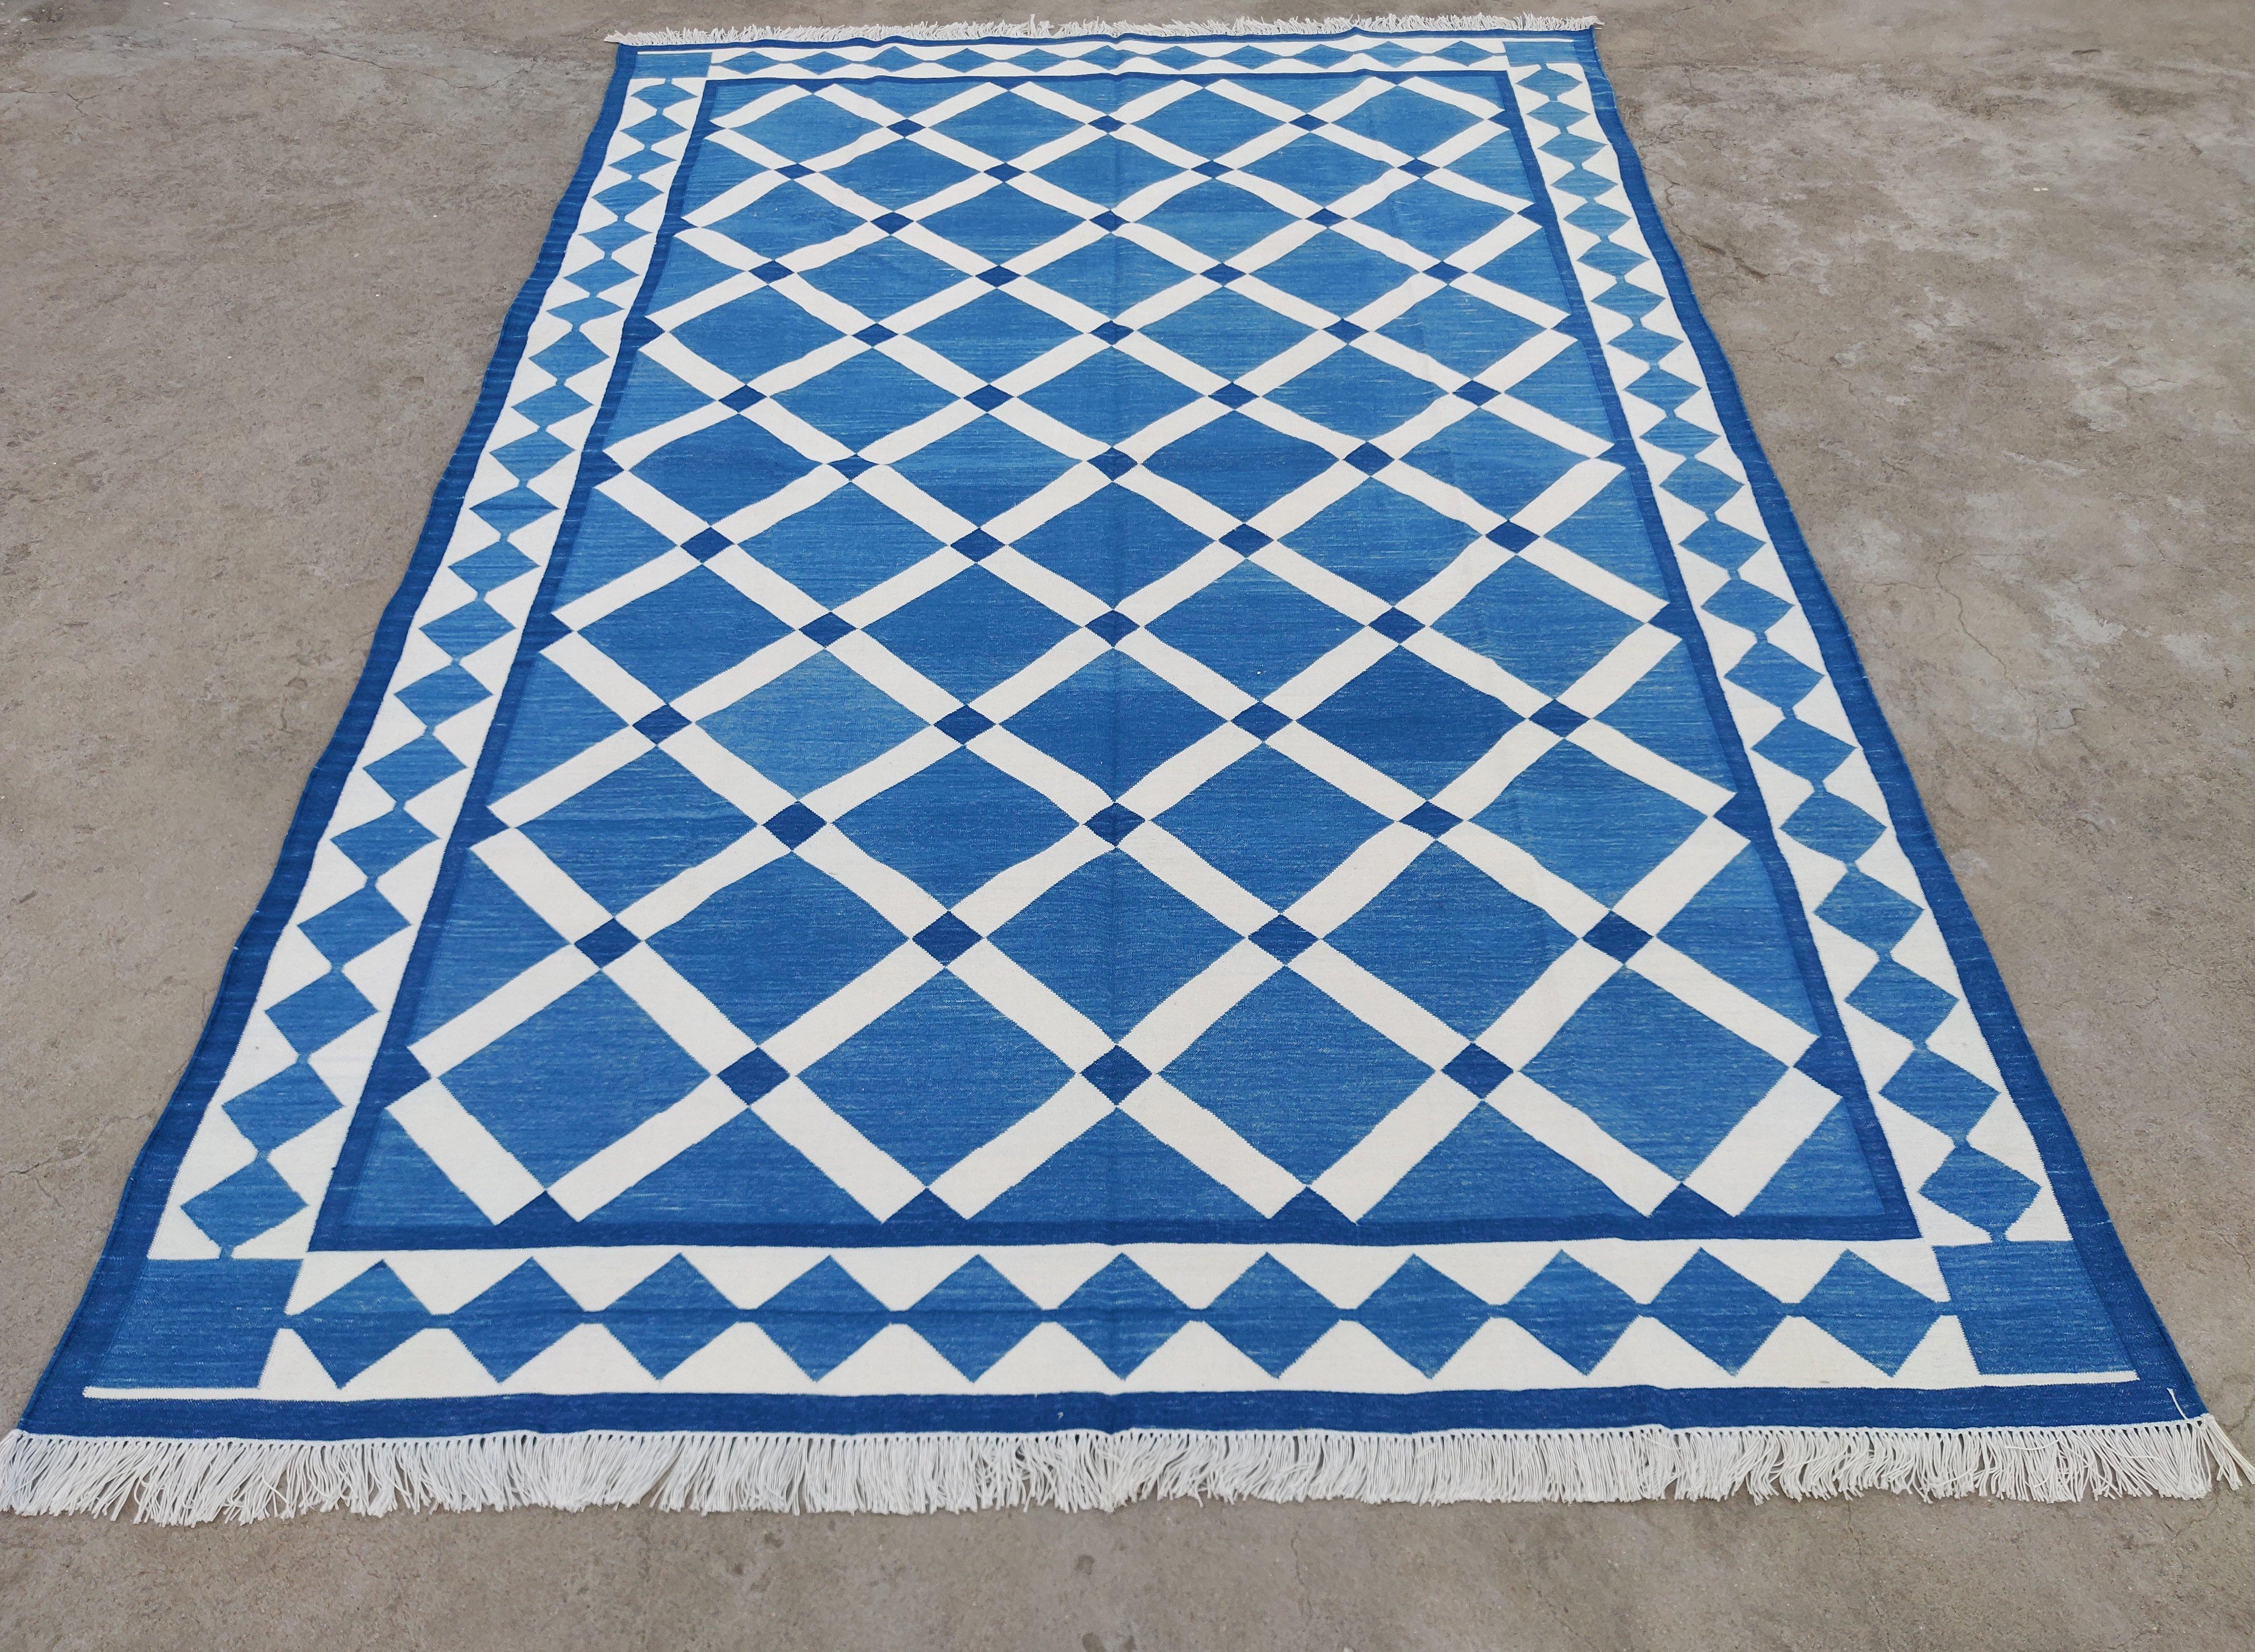 Hand-Woven Handmade Cotton Area Flat Weave Rug, Blue And White Geometric Indian Dhurrie Rug For Sale